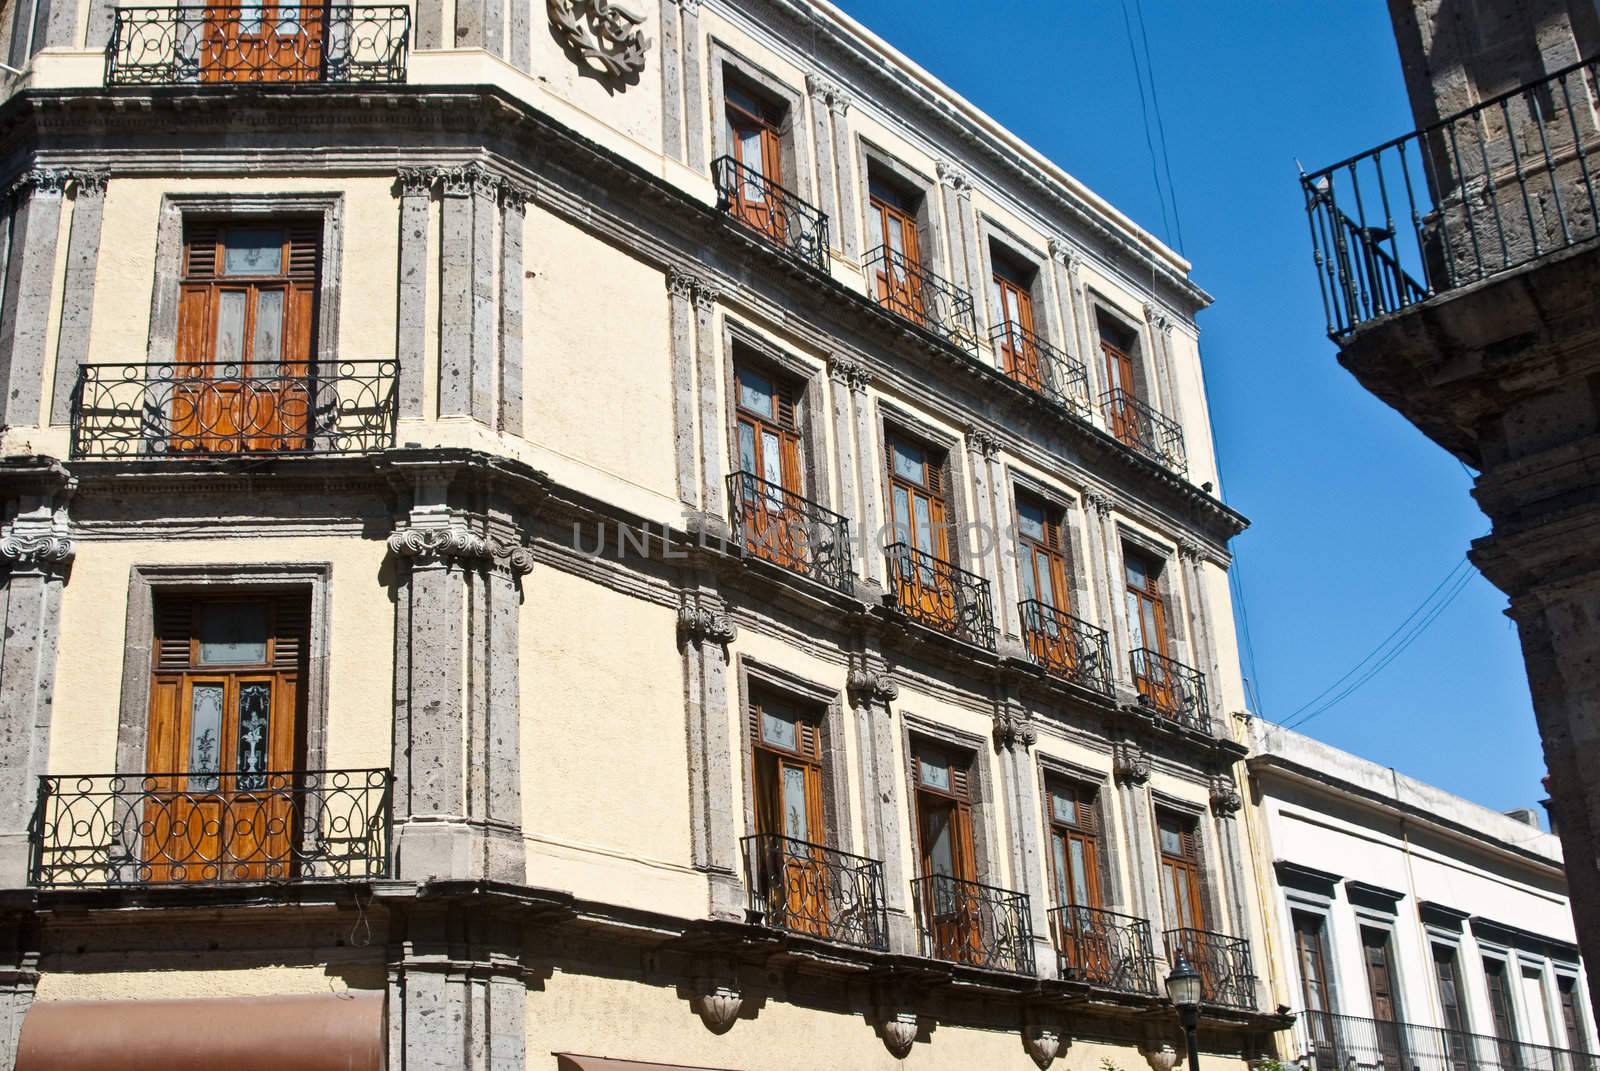 St. Francis Hotel is historic building from 15th century in Guadalajara, Mexico